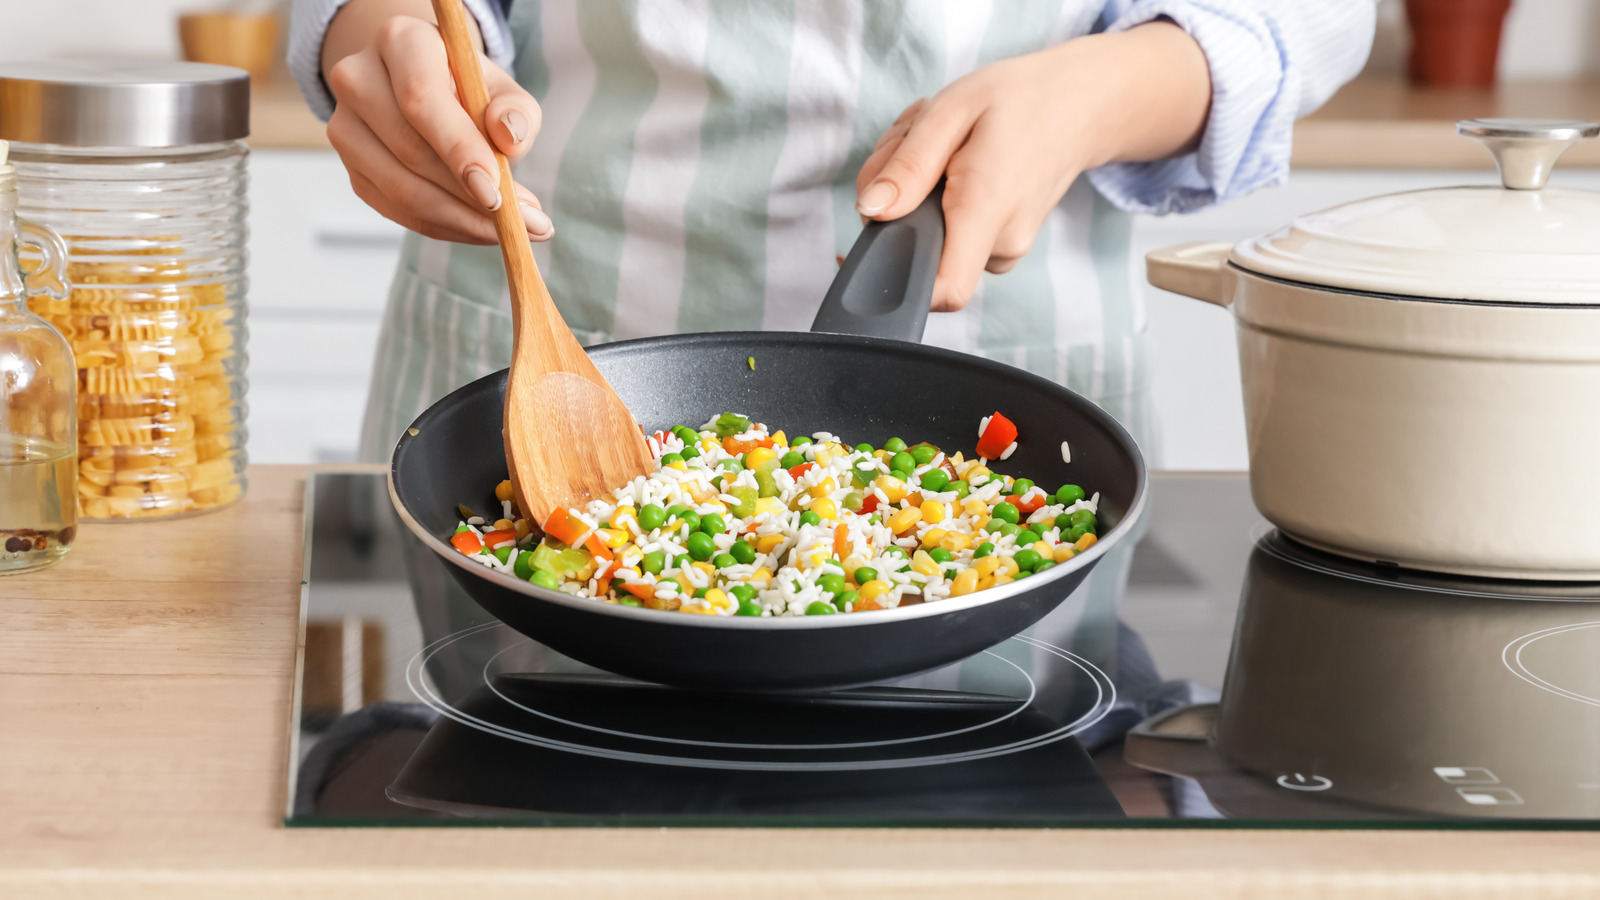 https://www.thedailymeal.com/img/gallery/whats-the-difference-between-a-skillet-and-a-pan/l-intro-1674420830.jpg